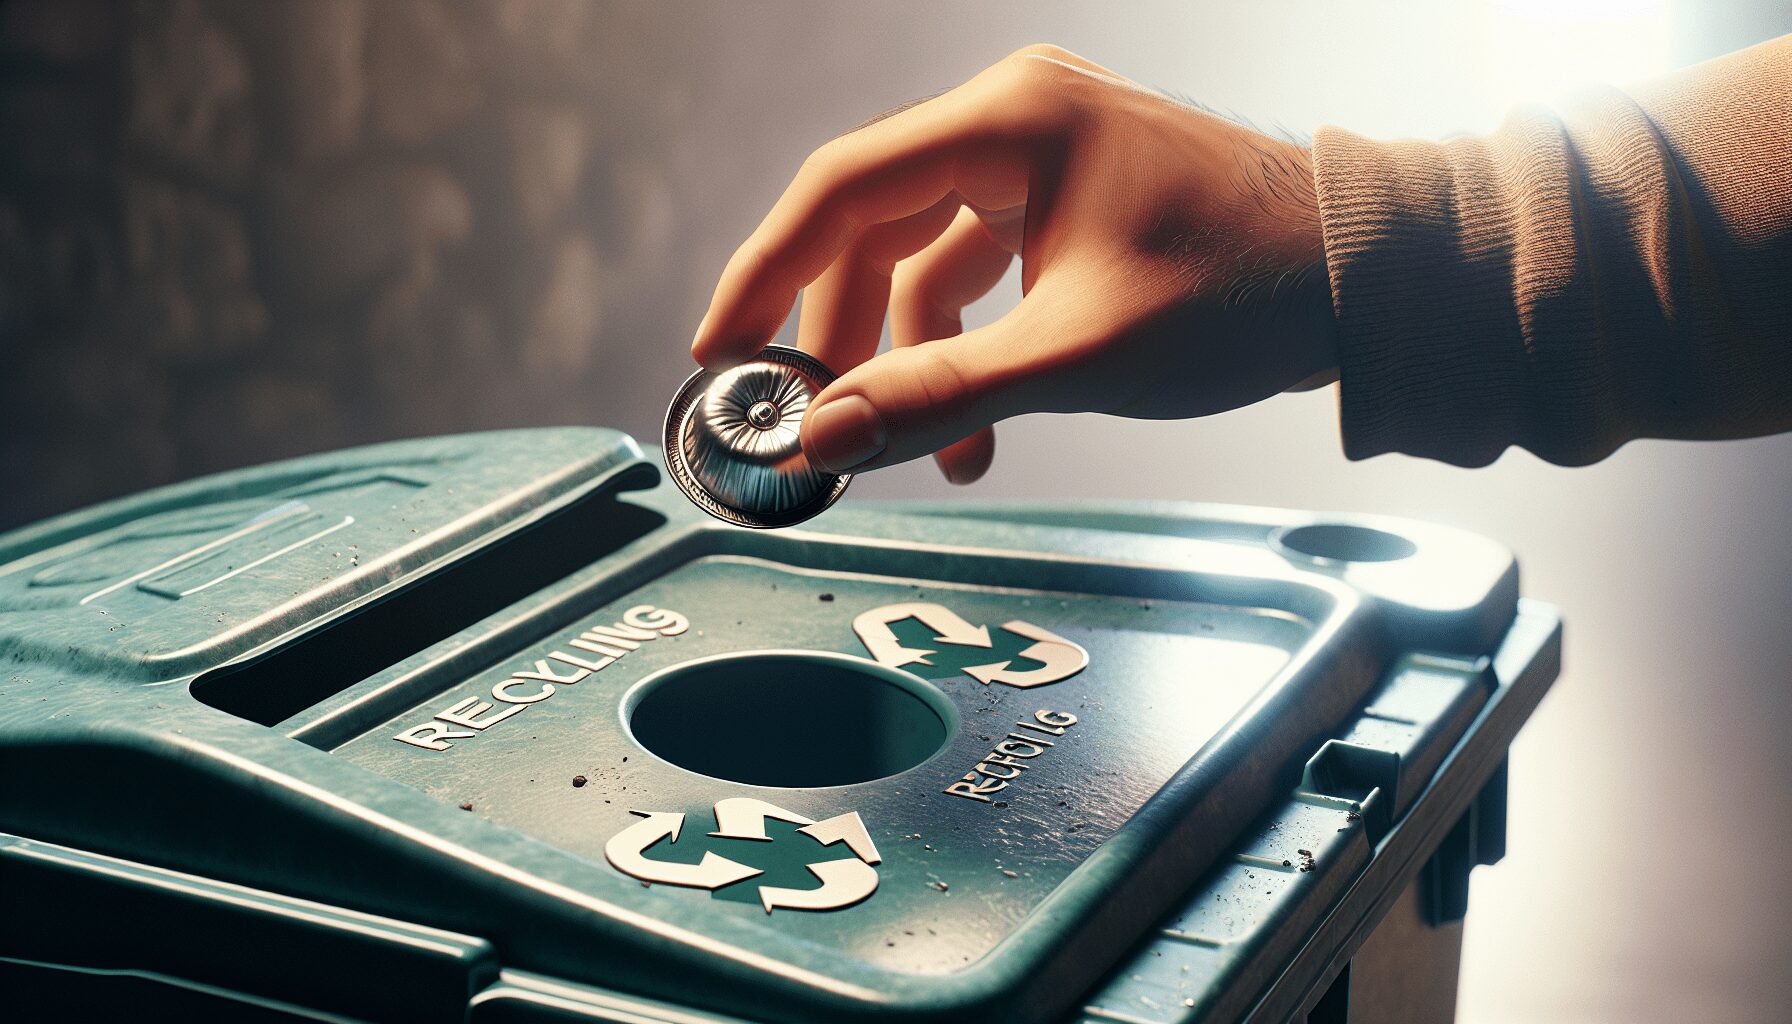 The Nespresso Recycling Program: How to Recycle Your Coffee Pods